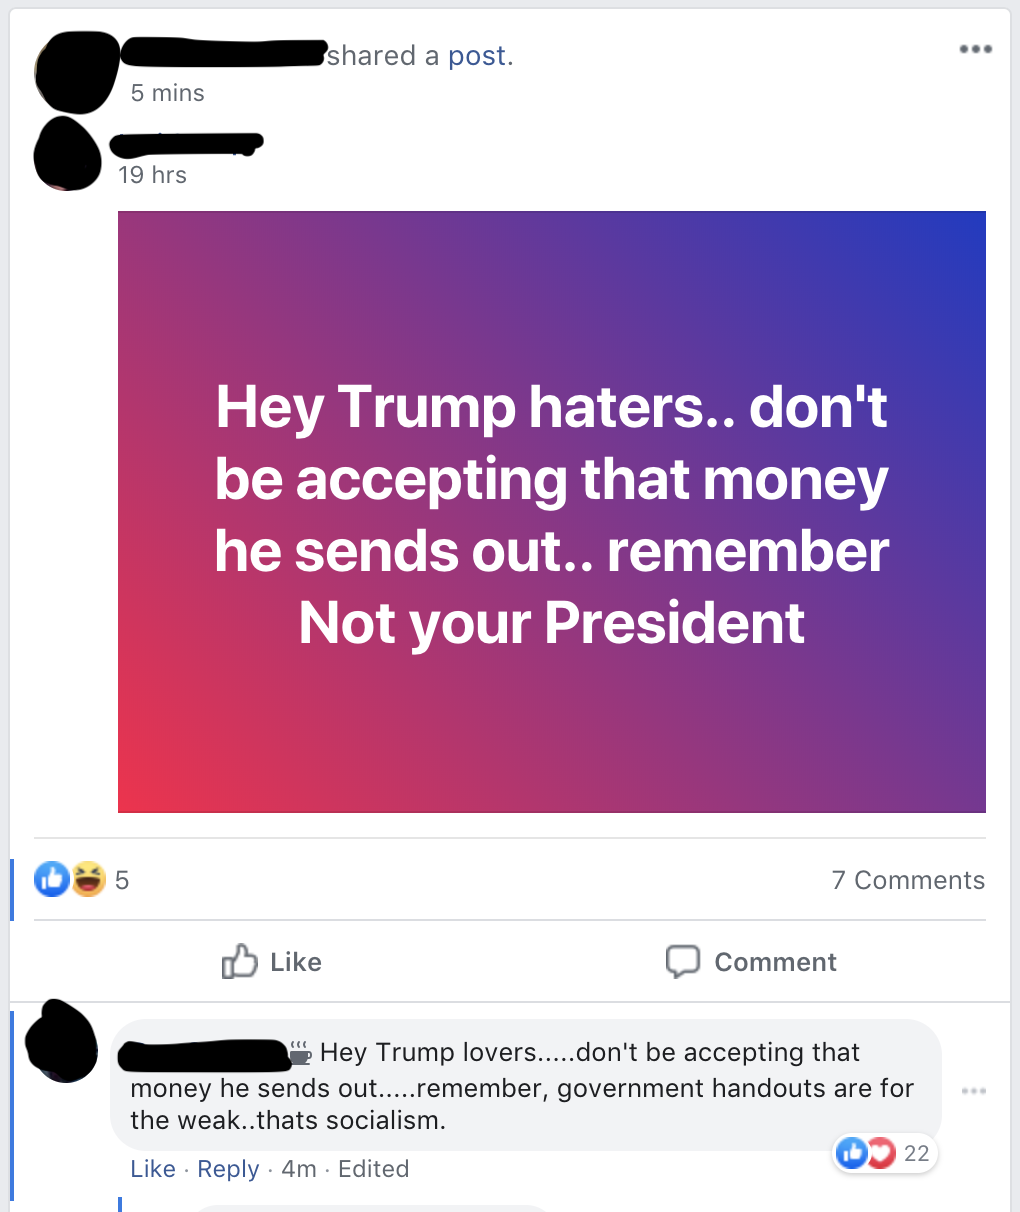 funny comments - Hey Trump haters.. don't be accepting that money he sends out.. remember Not your President - Hey Trump lovers.....don't be accepting that money he sends out...remember, government handouts are for the weak.